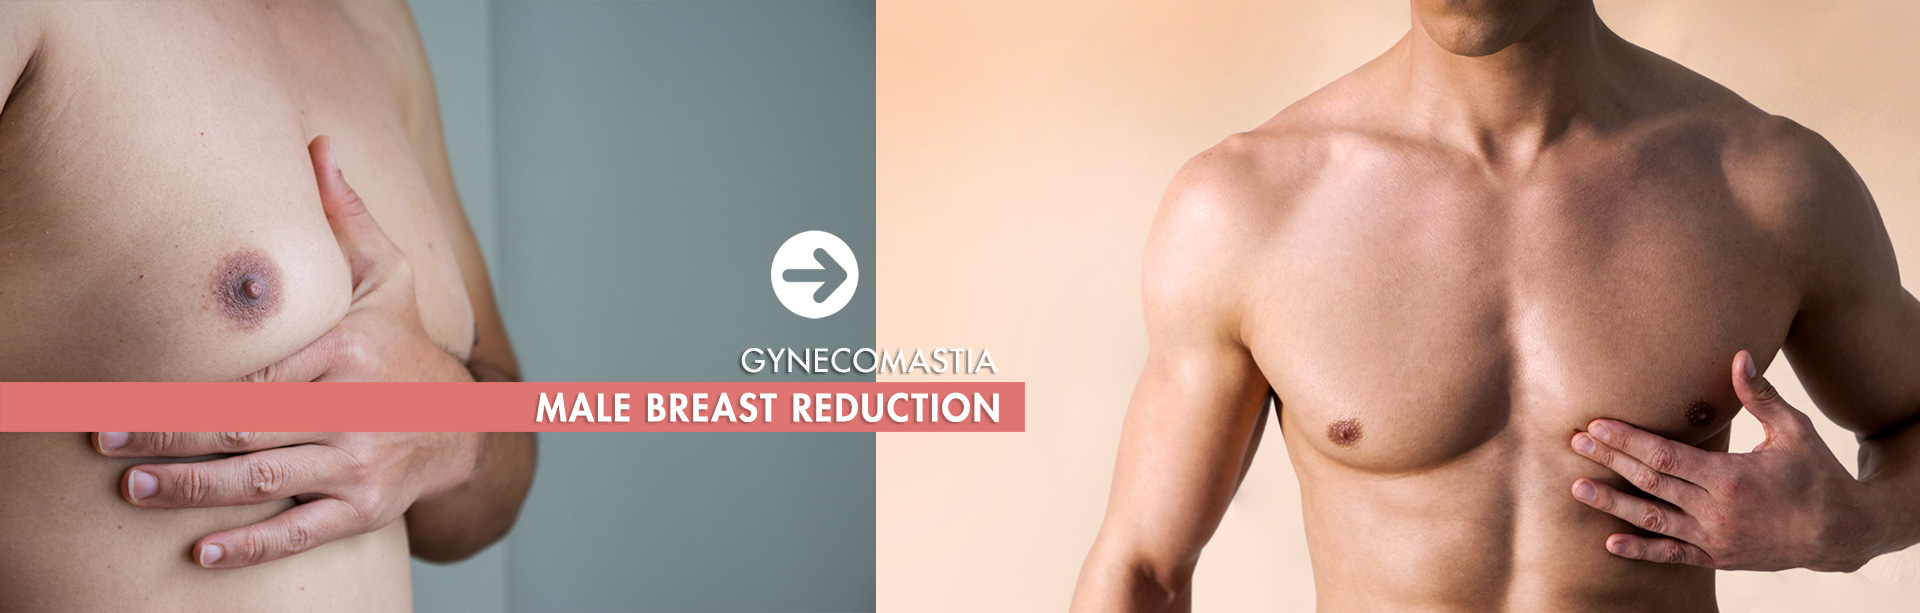 Male_Breast_Reduction